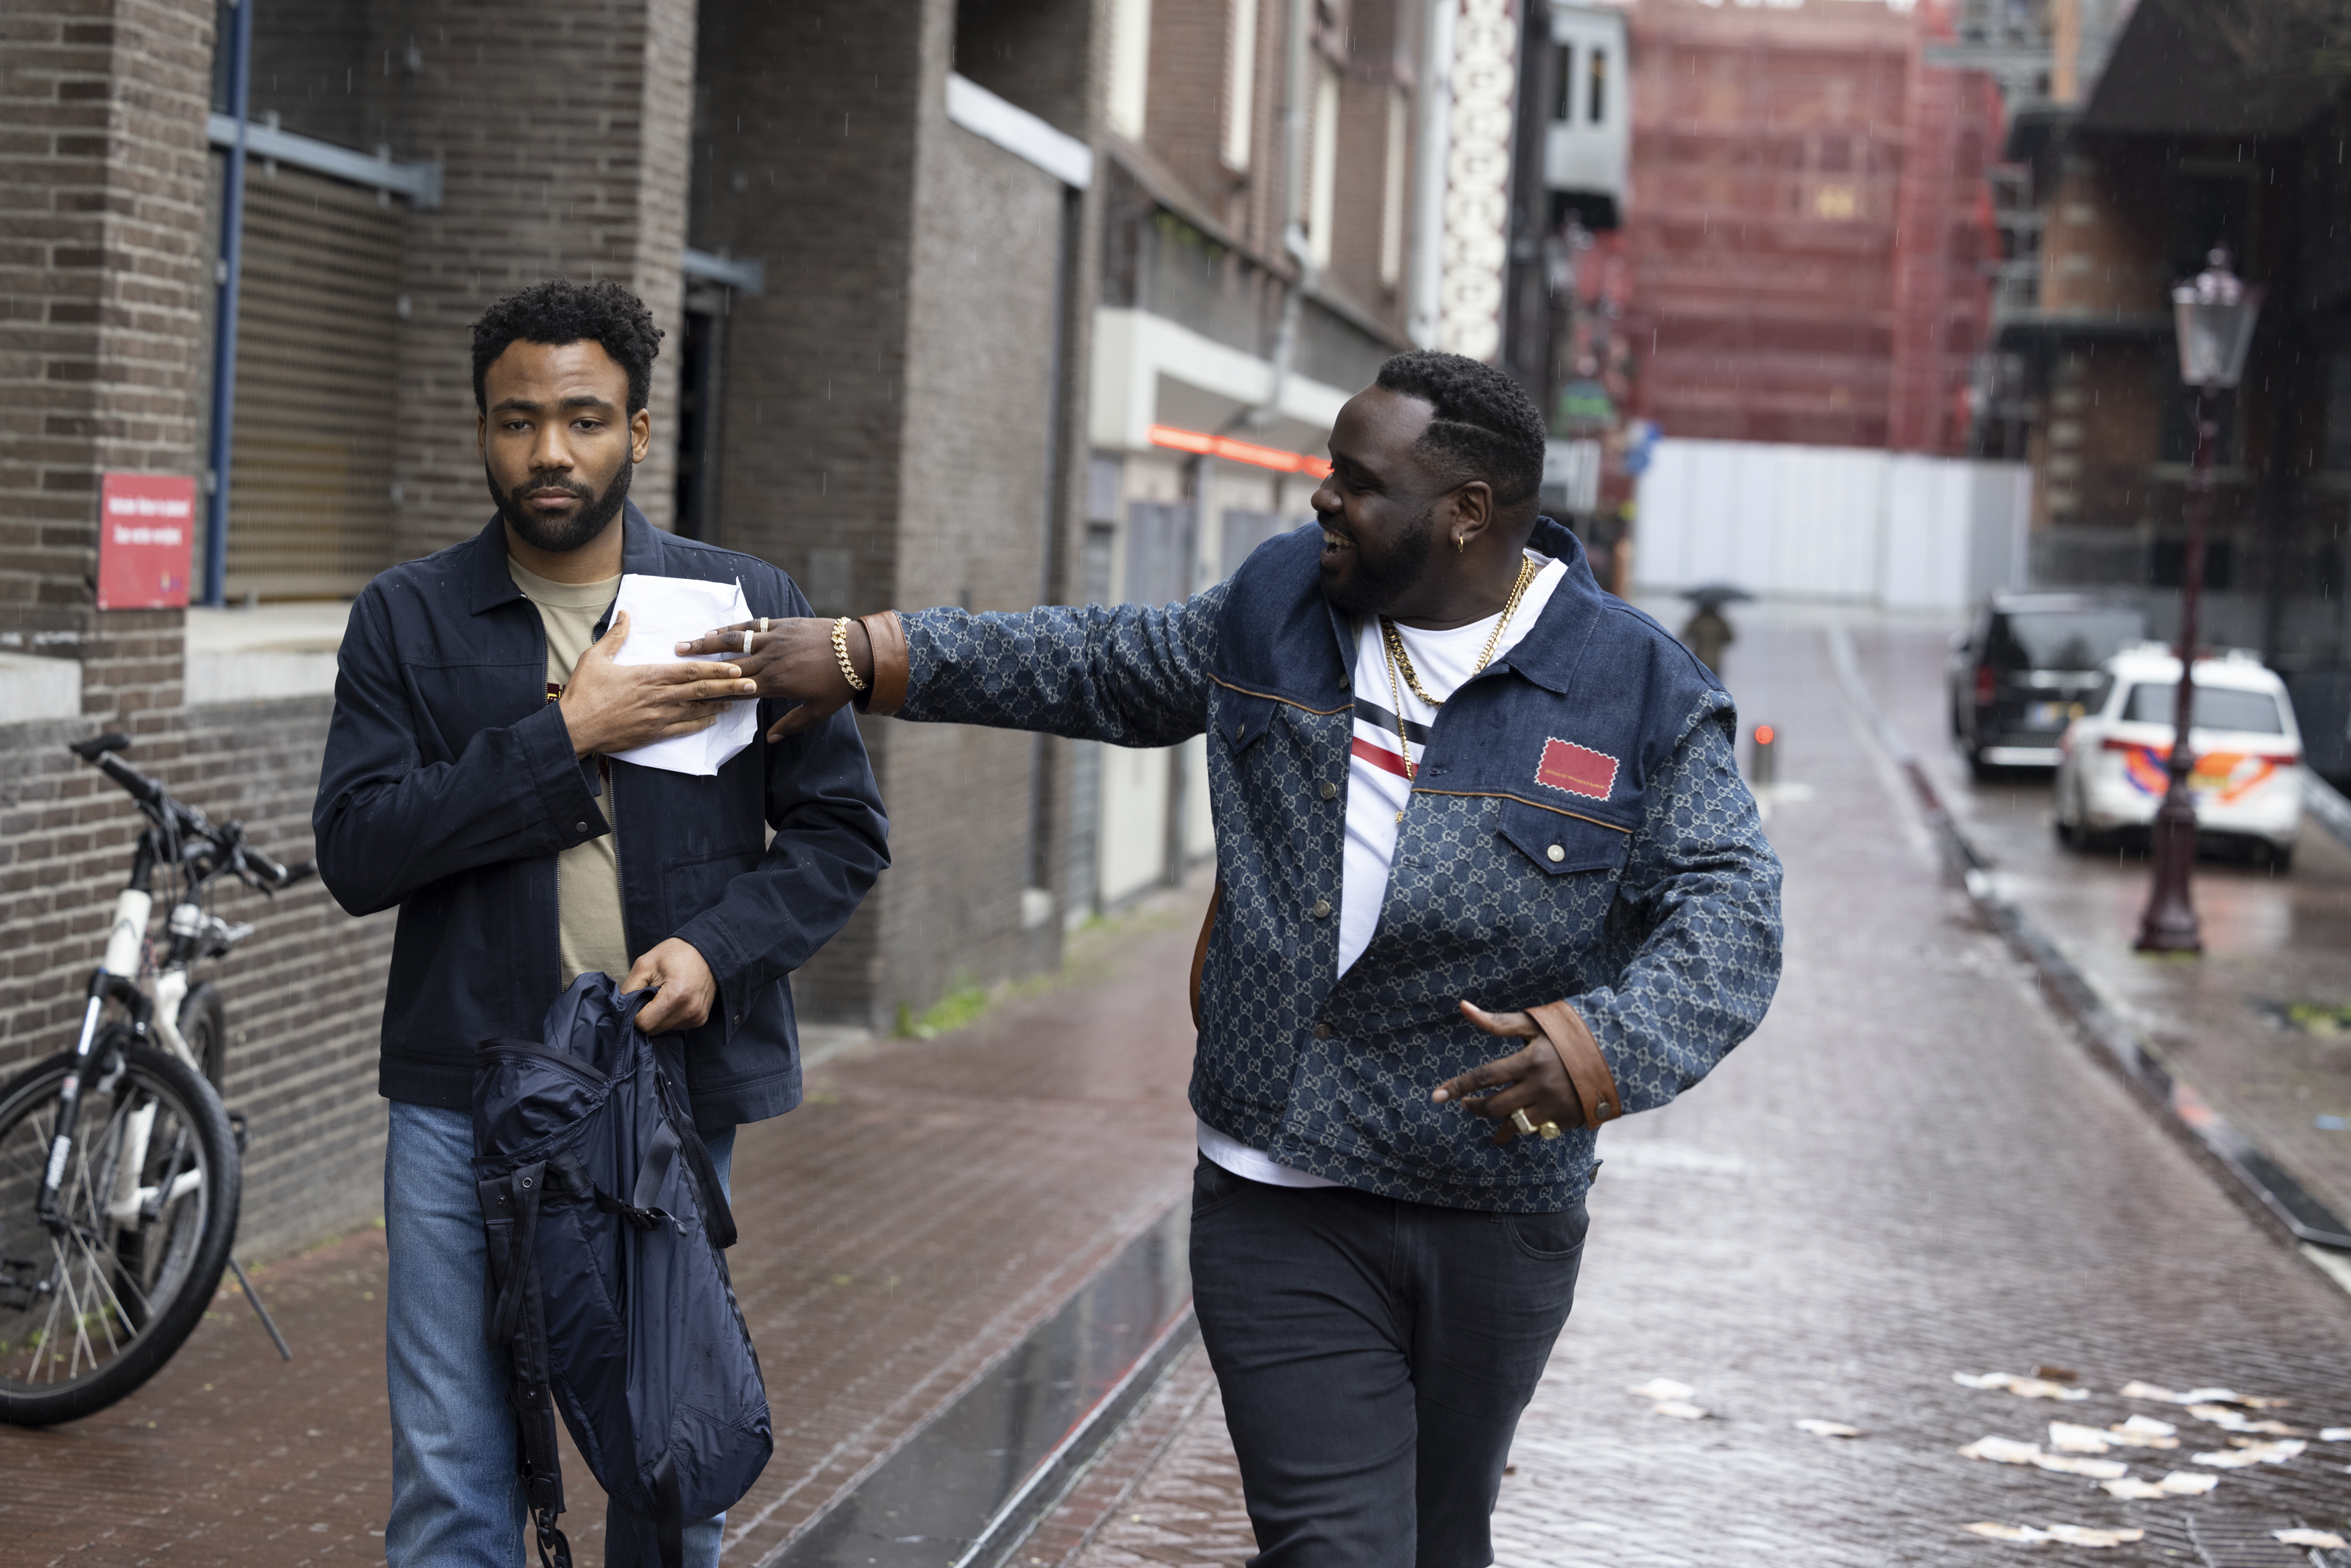 Donald Glover and Brian Tyree Henry in Donald Glover's FX surreal comedy-drama series, Atlanta, Season 3 Episode 2